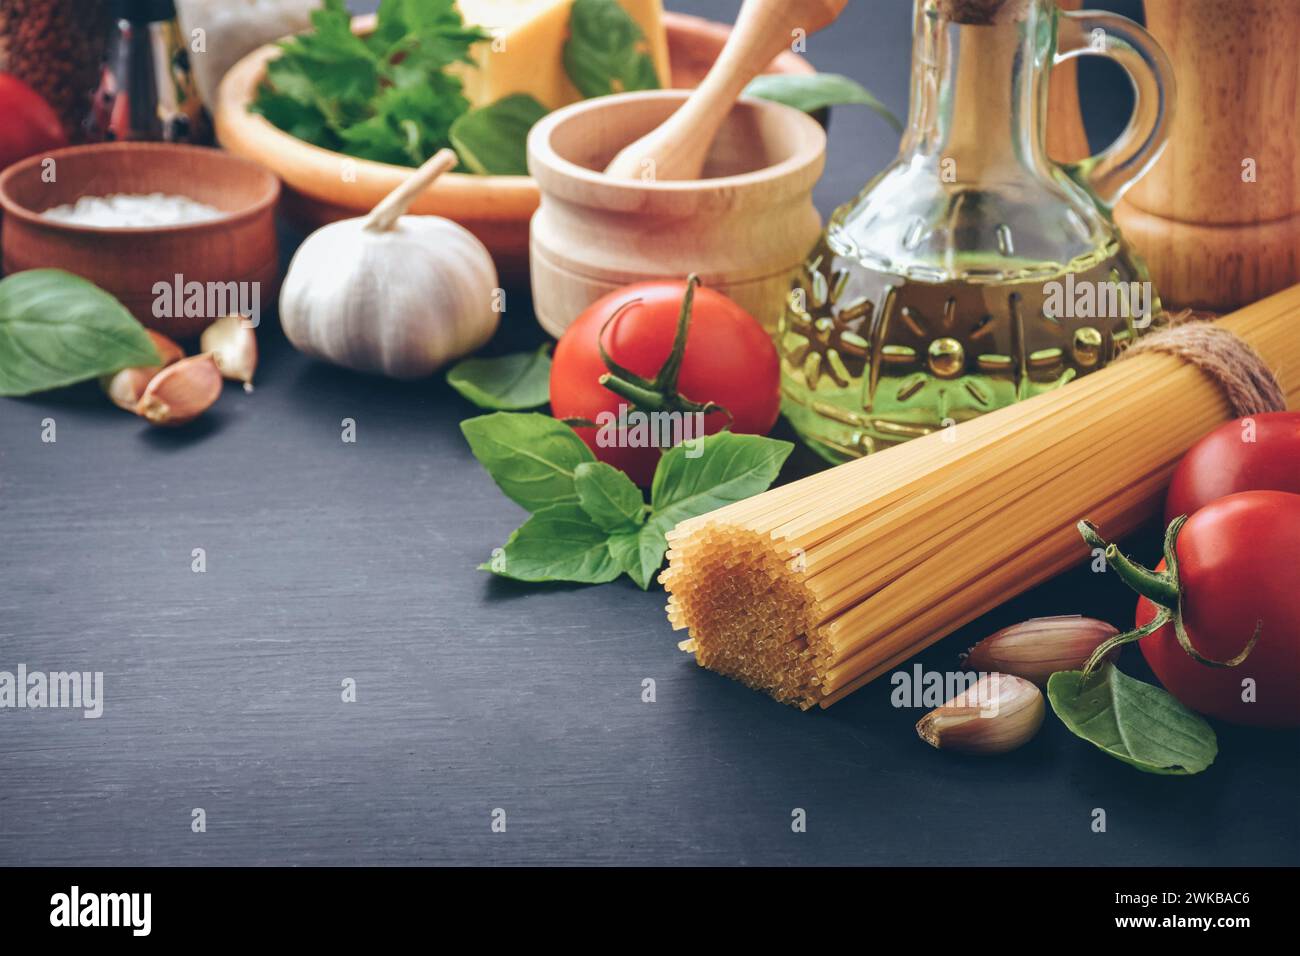 Ingredients for cooking pasta spaghetti alla puttanesca - italian pasta dish with tomatoes, black olives, capers, anchovies and parsley. Stock Photo